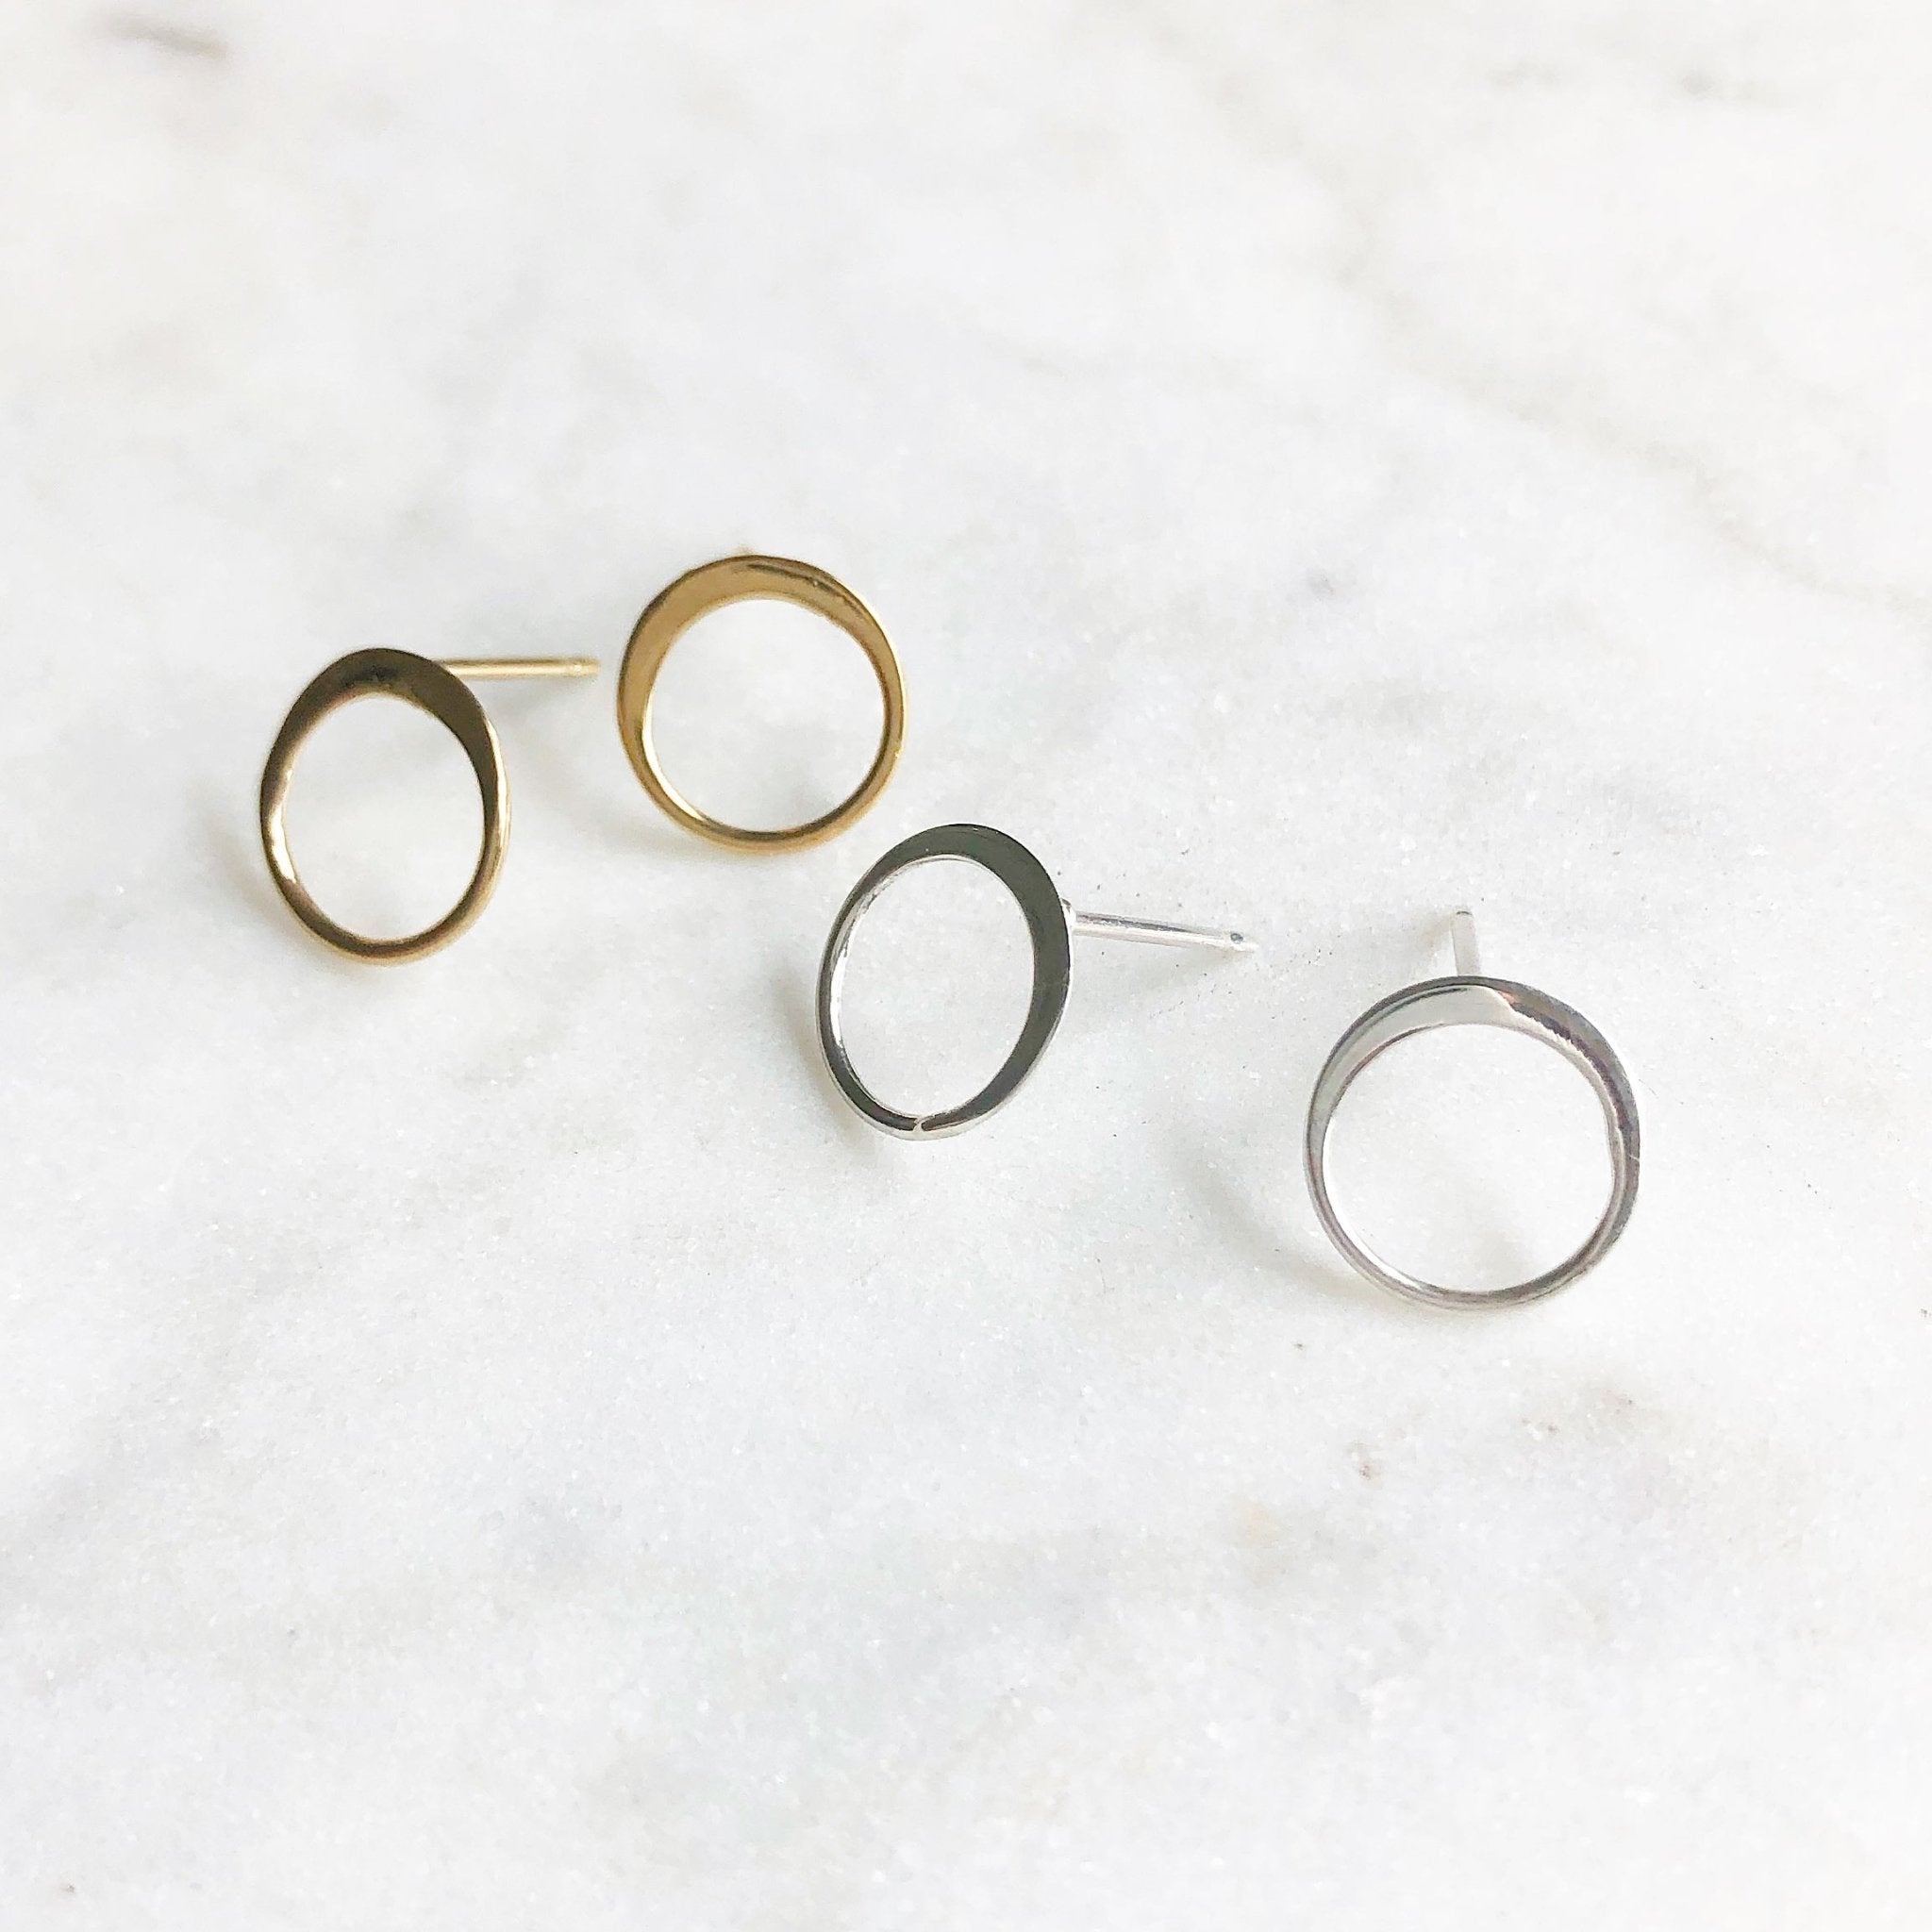 2 pairs of gold and silver simple circle stud earrings. Circle Studs by Sarah Cornwell Jewelry